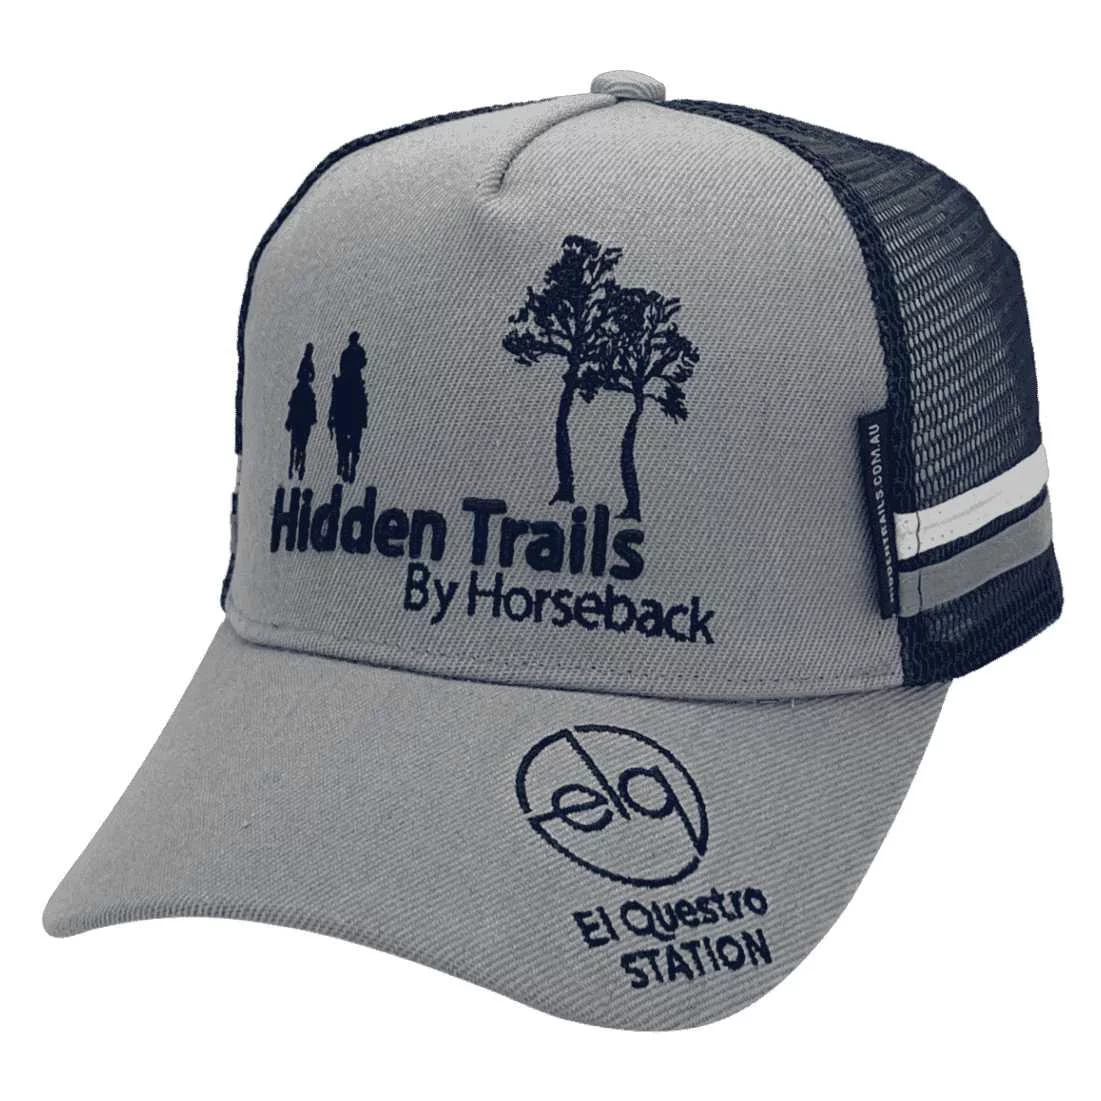 Hidden Trials By Horseback Tolmie Vic LP Midrange Aussie Trucker Hat with Australian Head Fit Crown and Double Side Bands Grey Navy